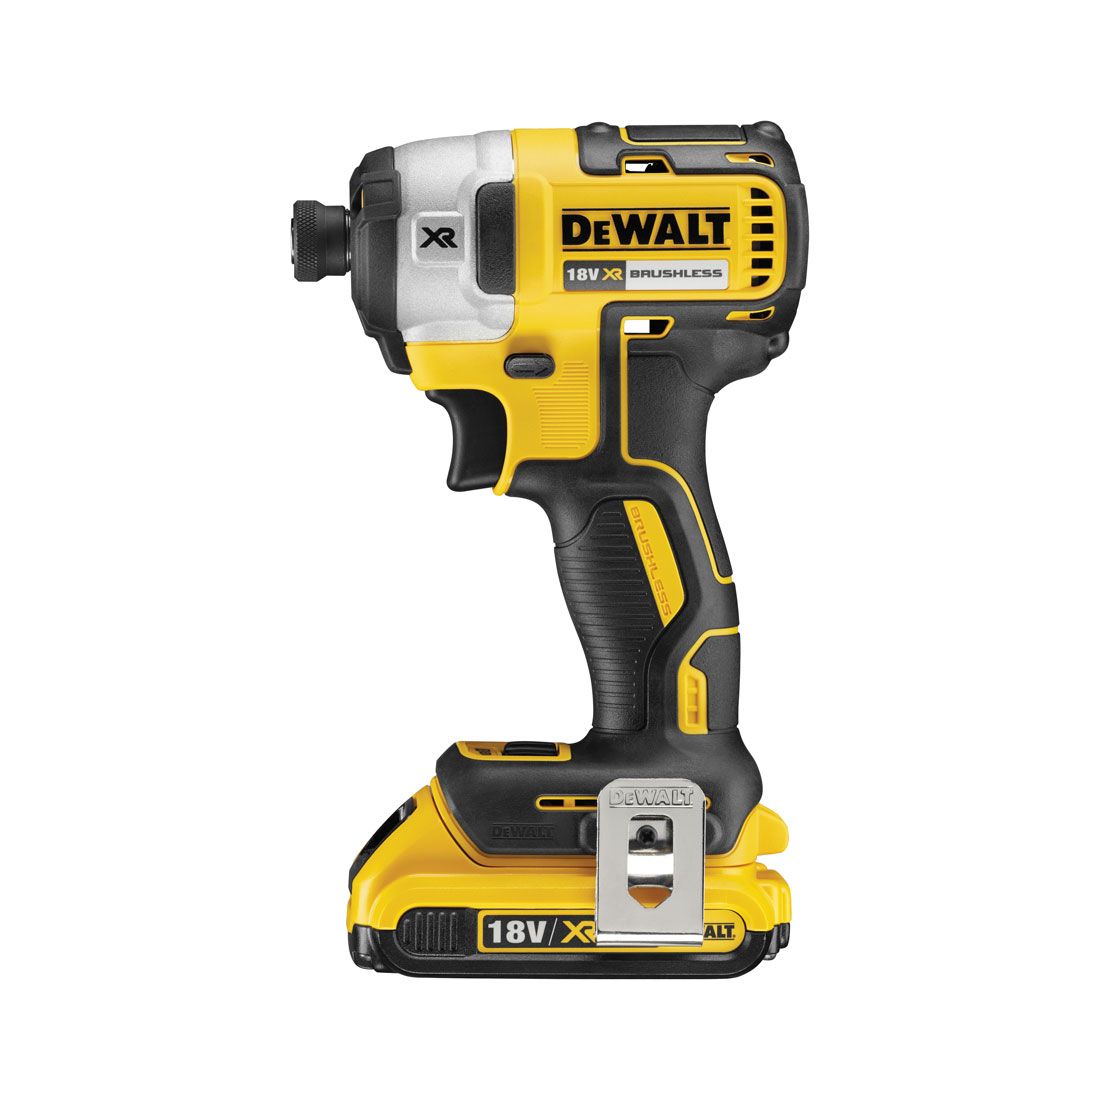 DeWalt DCF887D2-GB -XR 18V Brushless 2nd Generation, 3 Speed Impact Driver Kit complete with  2 x 2.0Ah Batteries, Charger & Case